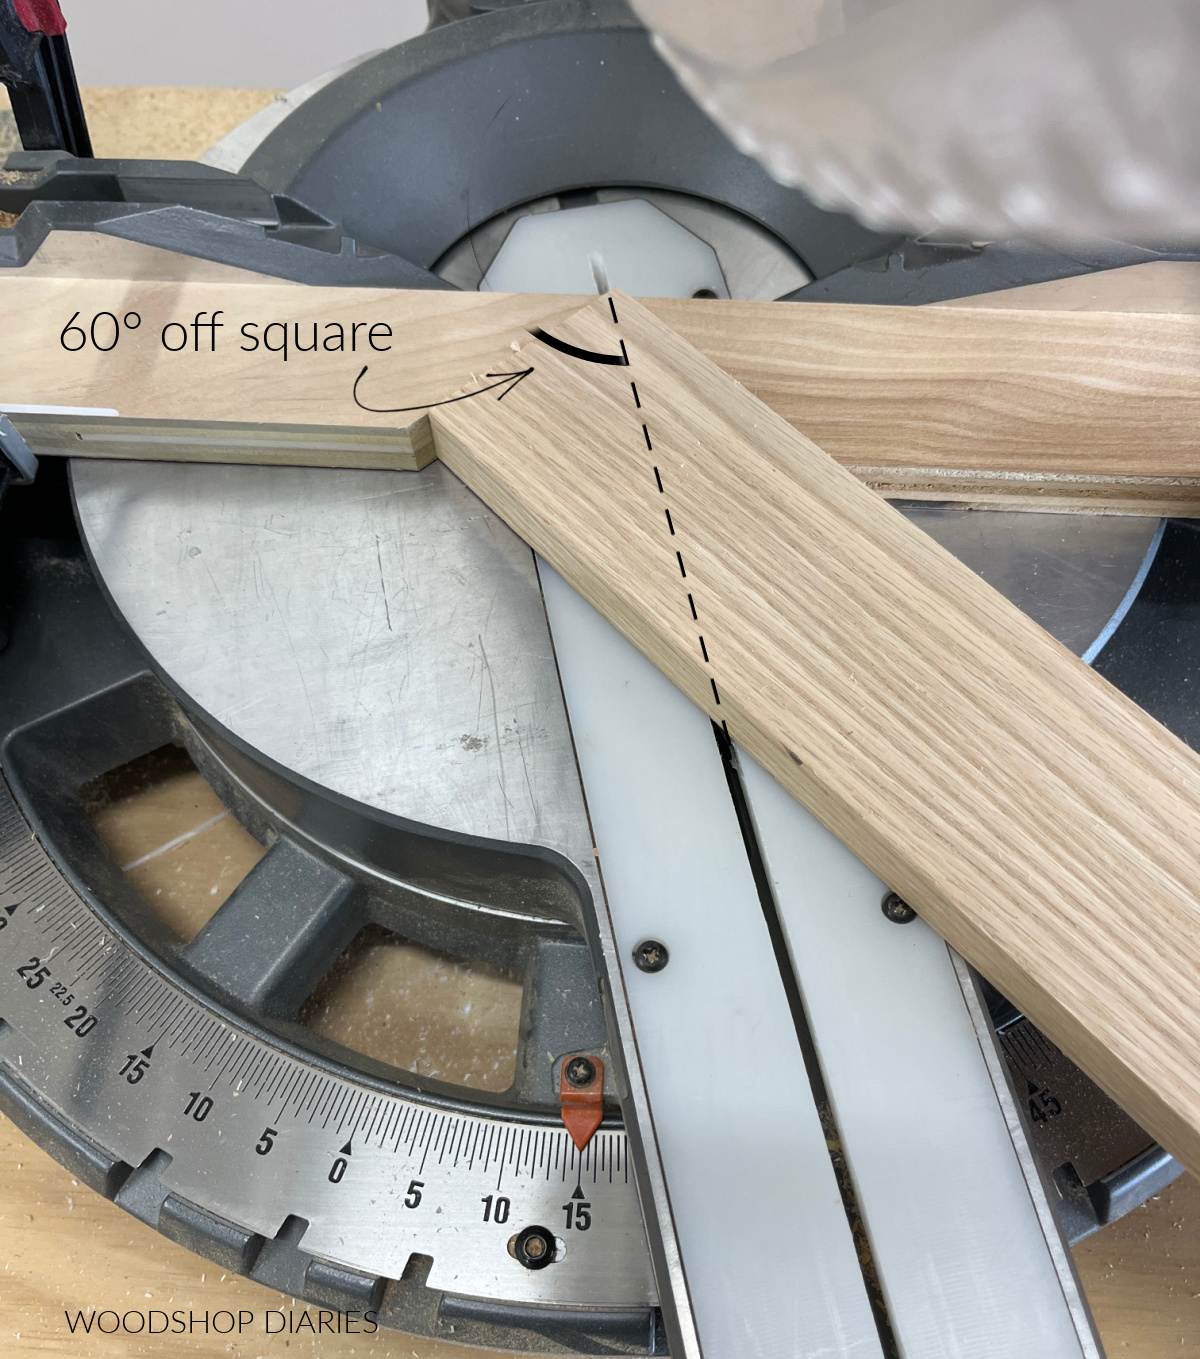 board placed in miter saw scrap blocks showing 15 degree angle setting is 60 degree cut